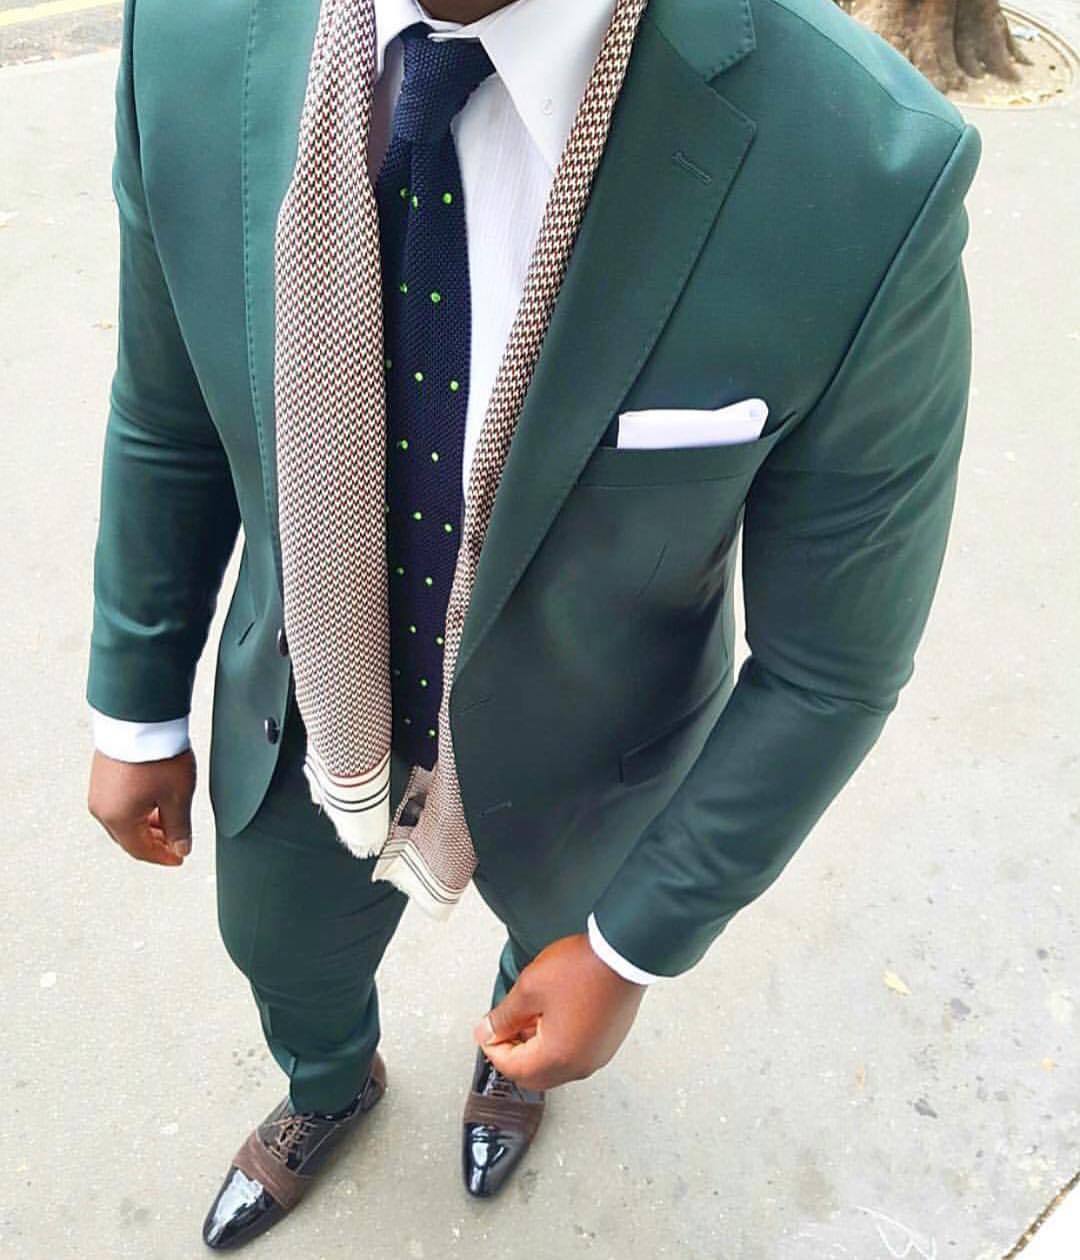 dappermenblog: What do you think of this look?... - Moda Trends Magazine